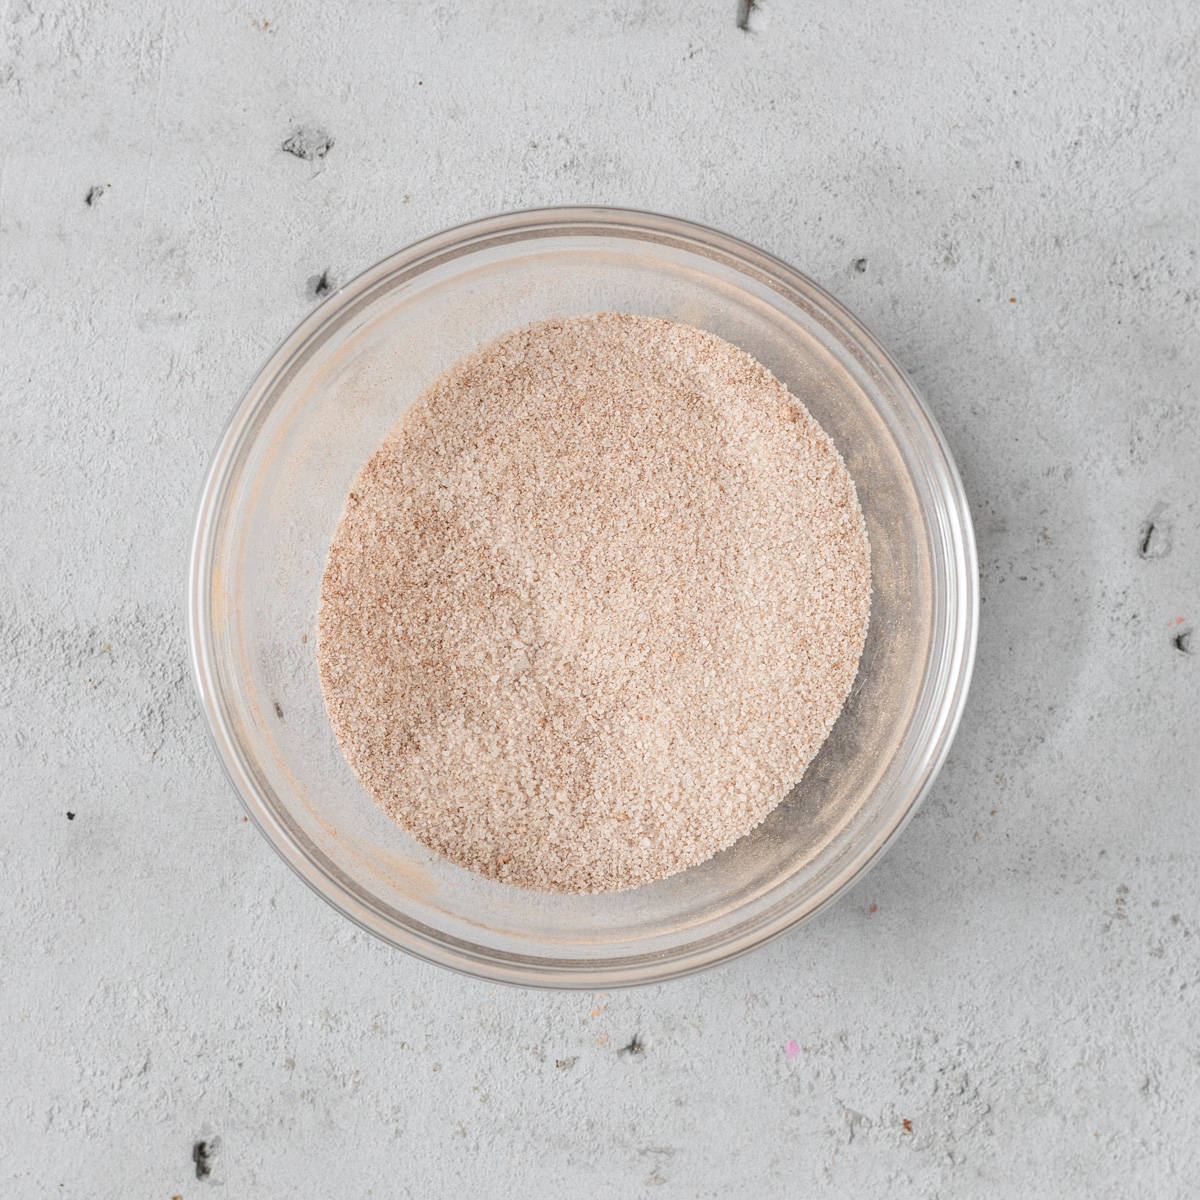 the cinnamon sugar mixture in a glass bowl on a grey background.